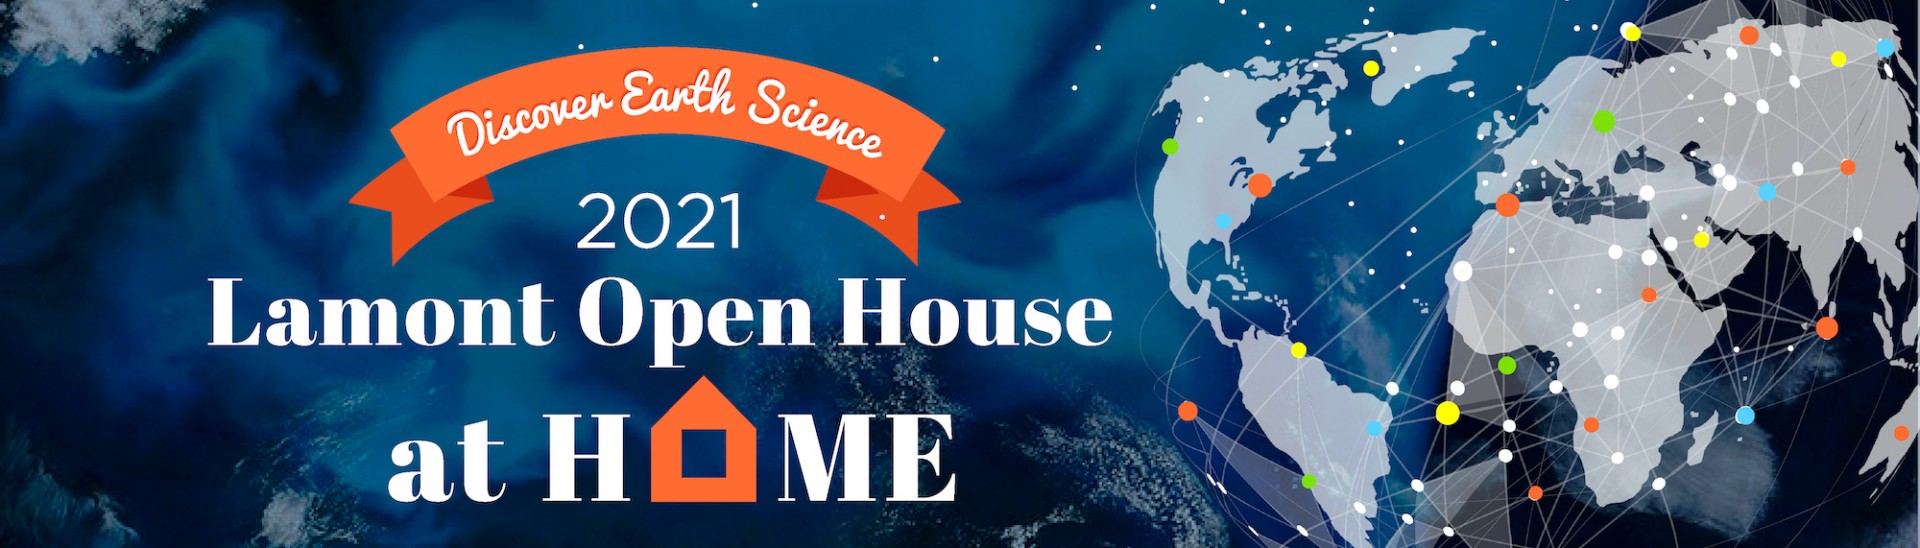 "2021 Lamont Open House at Home" text over world map